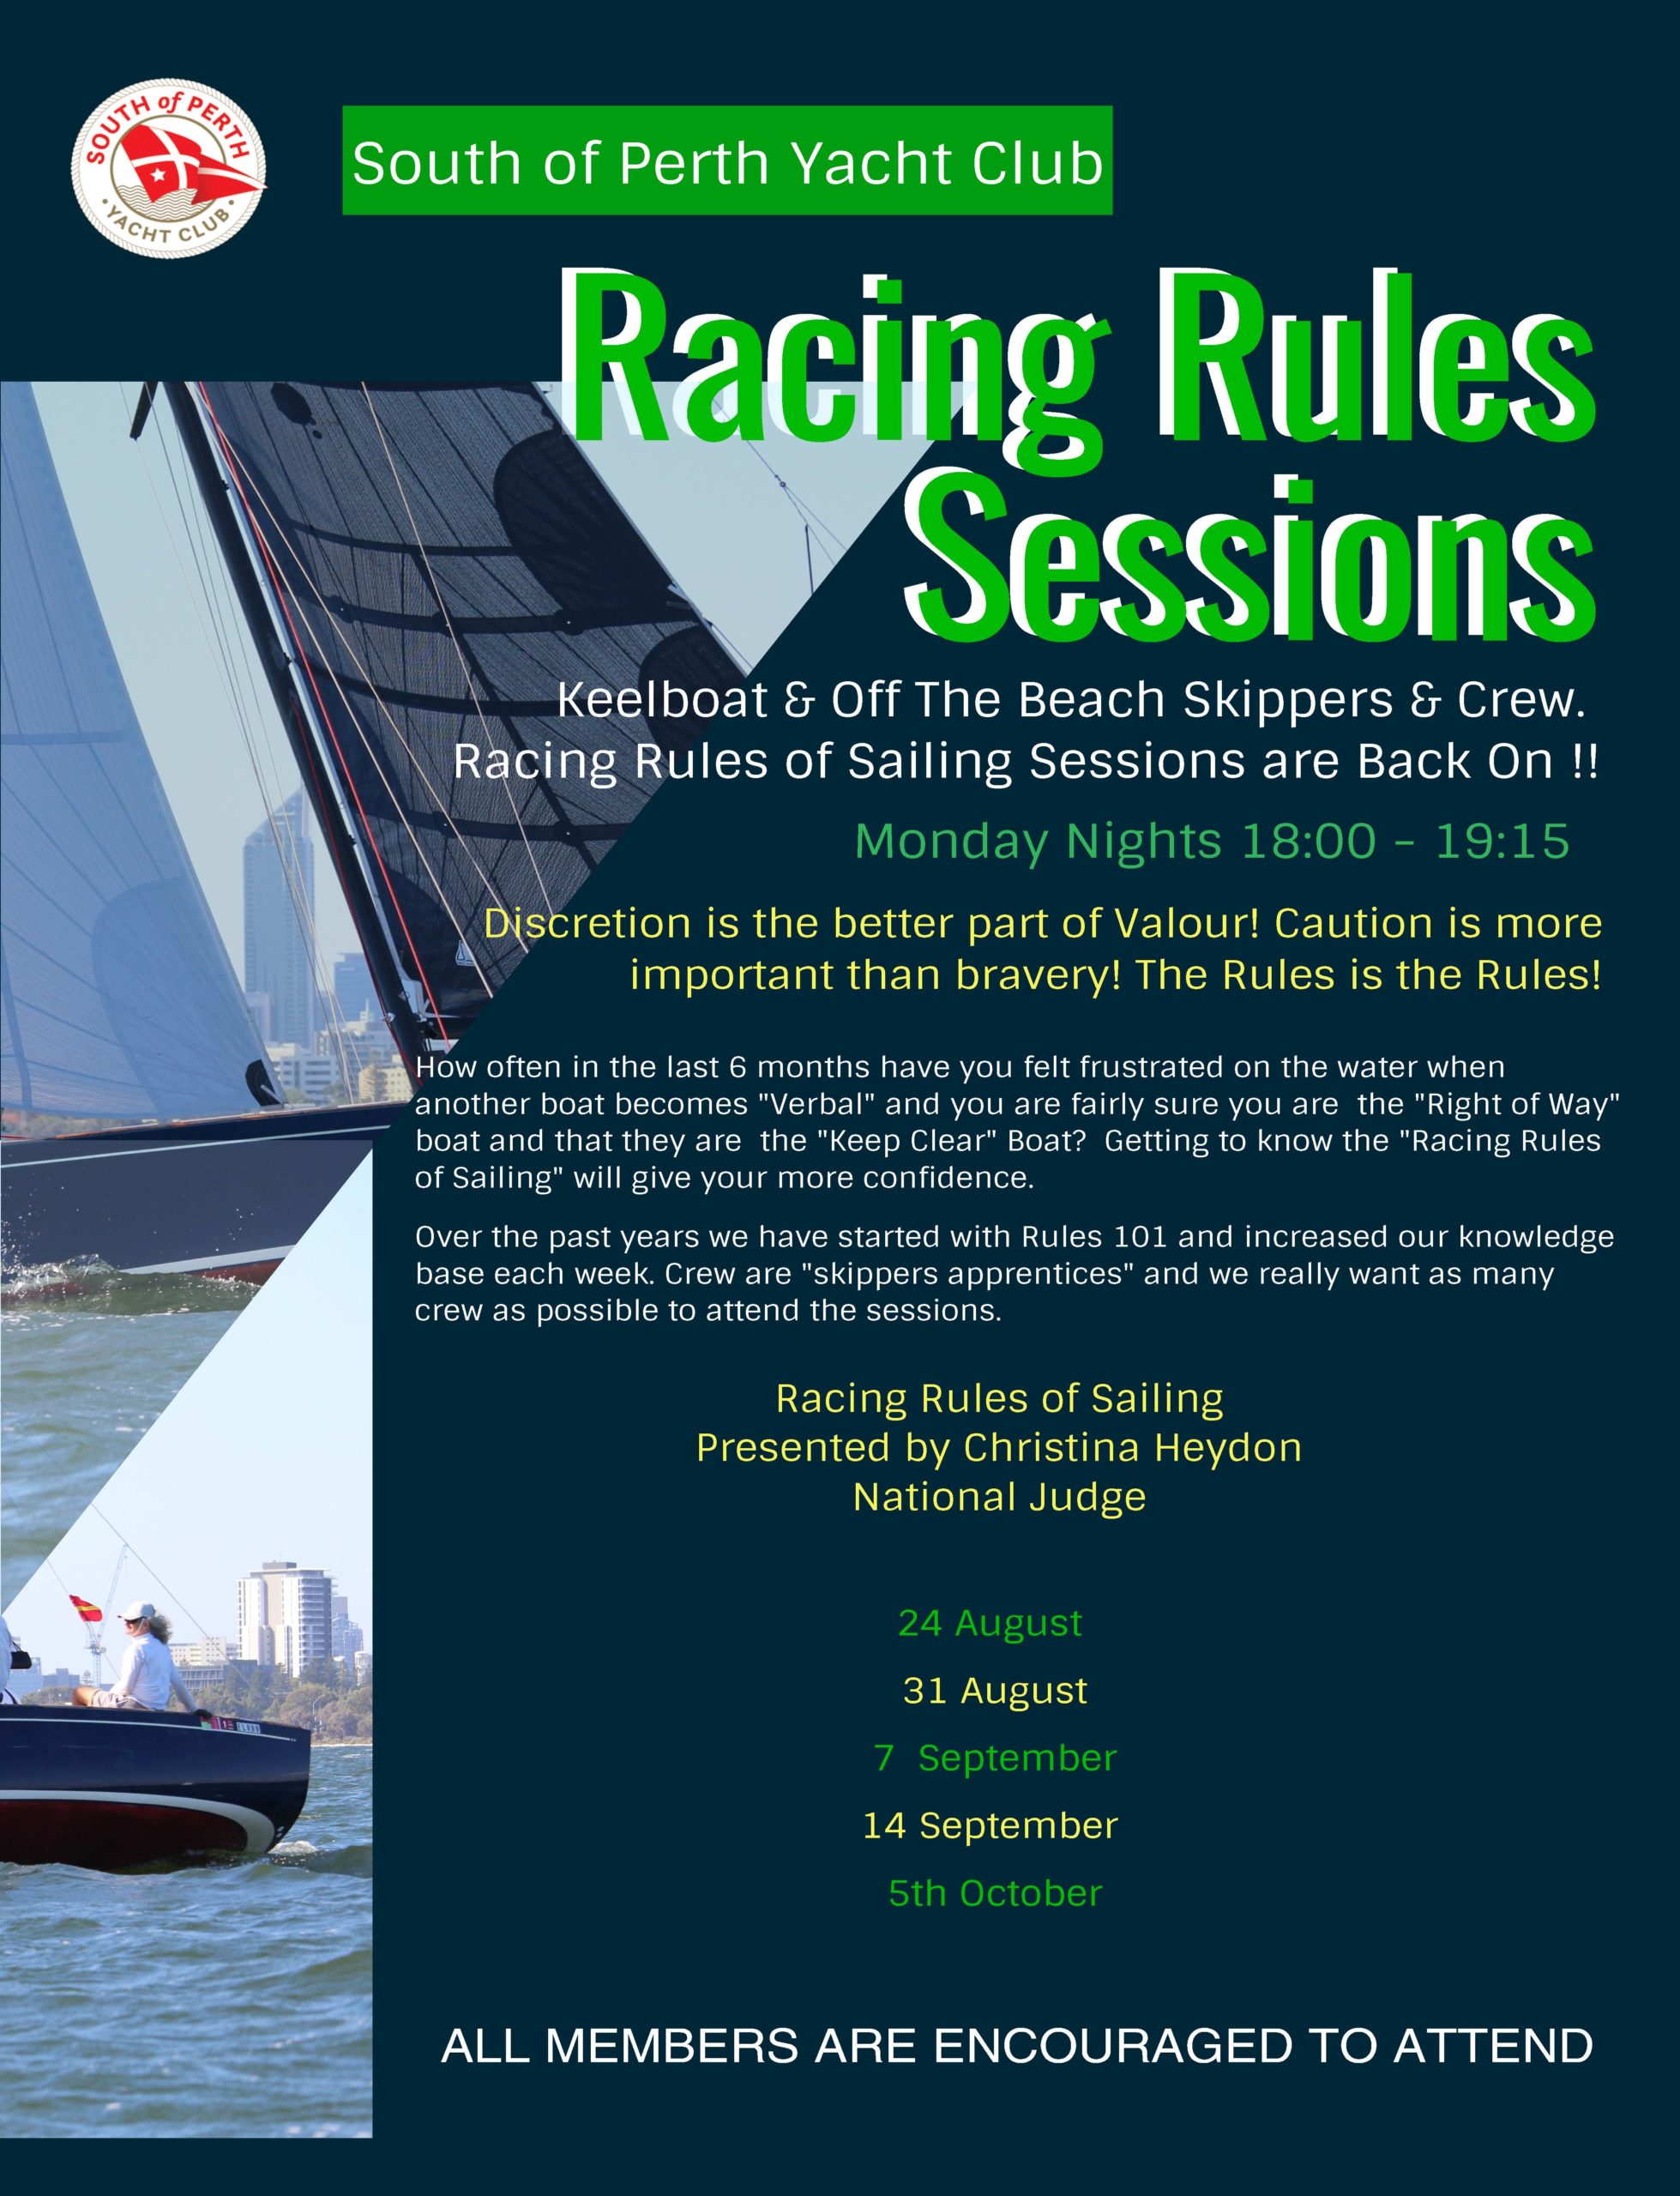 Racing Rules Sessions 2020 Schedule